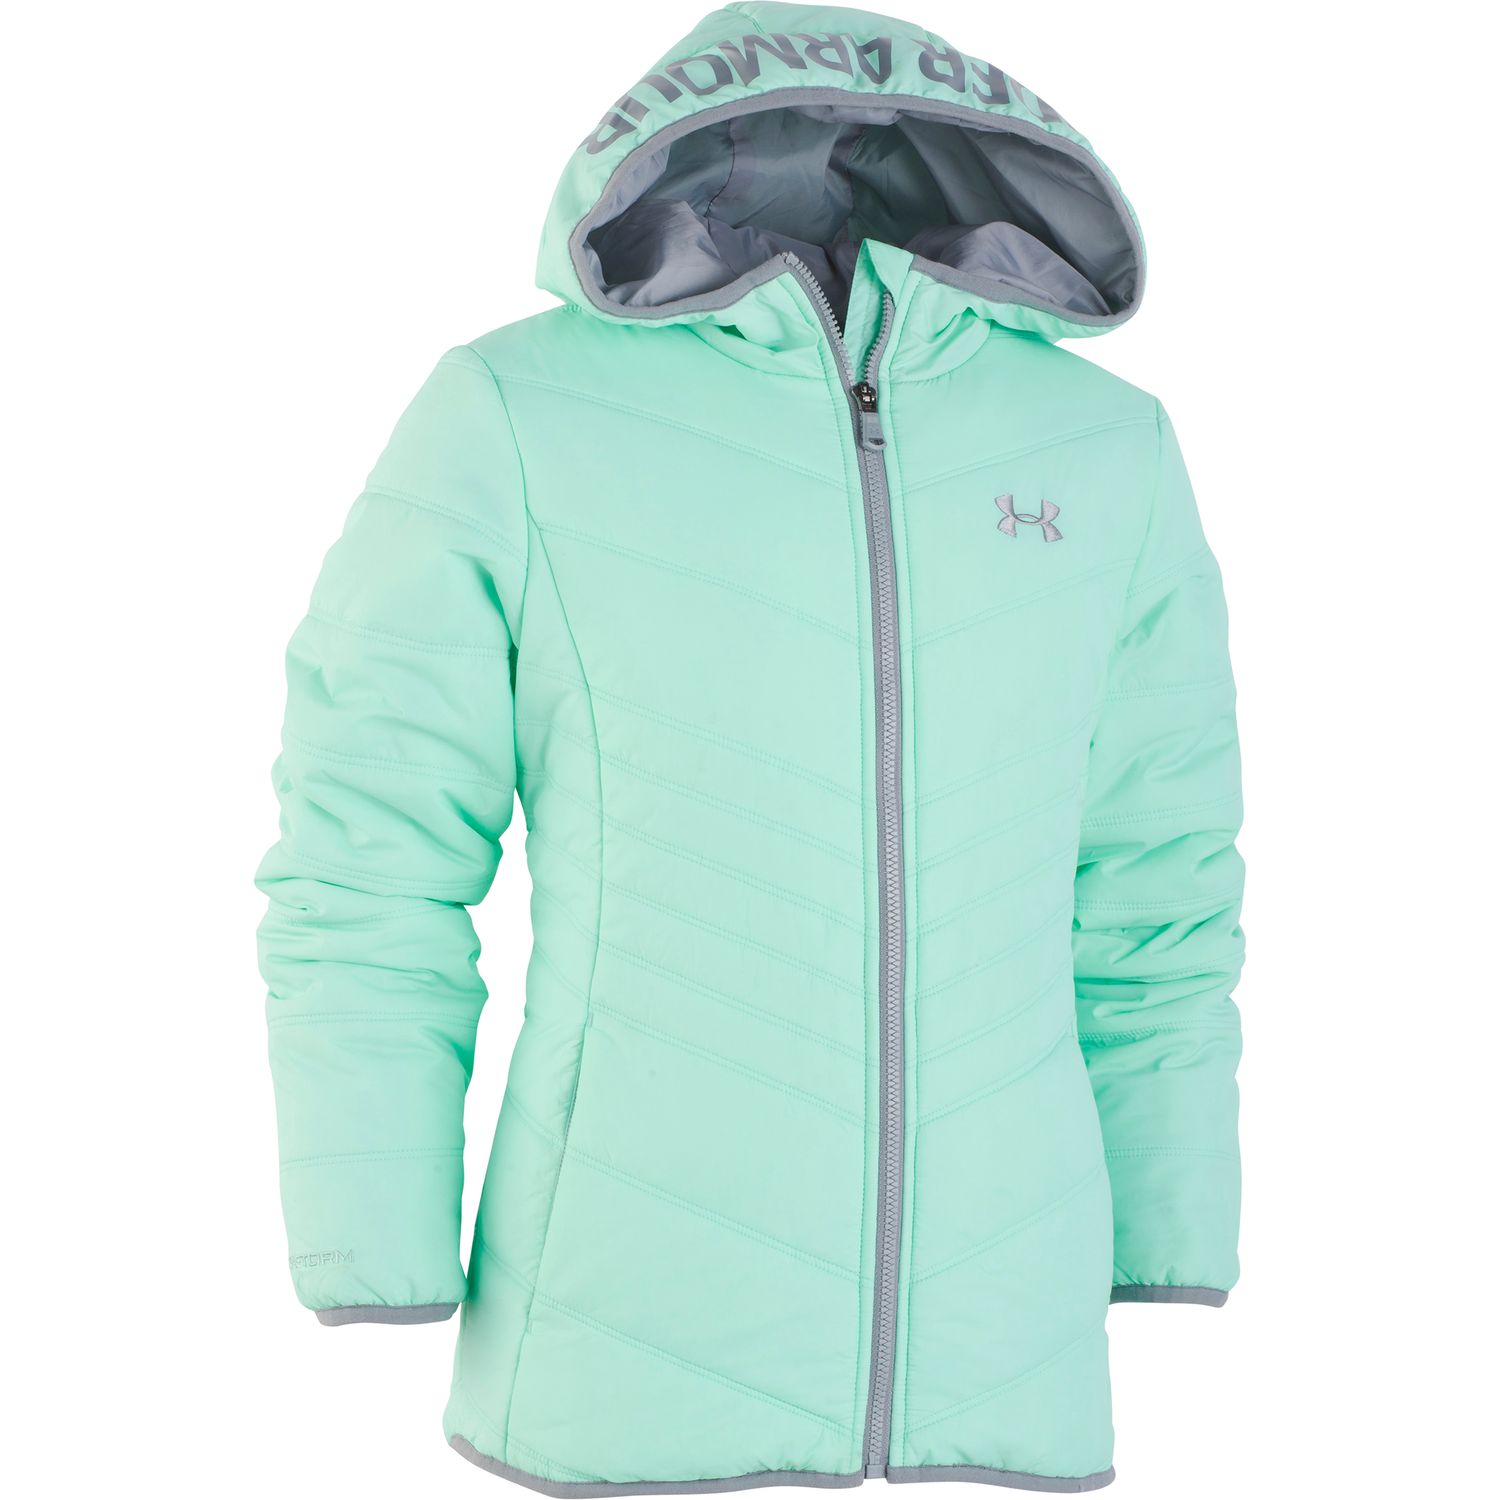 girls under armour prime puffer jacket